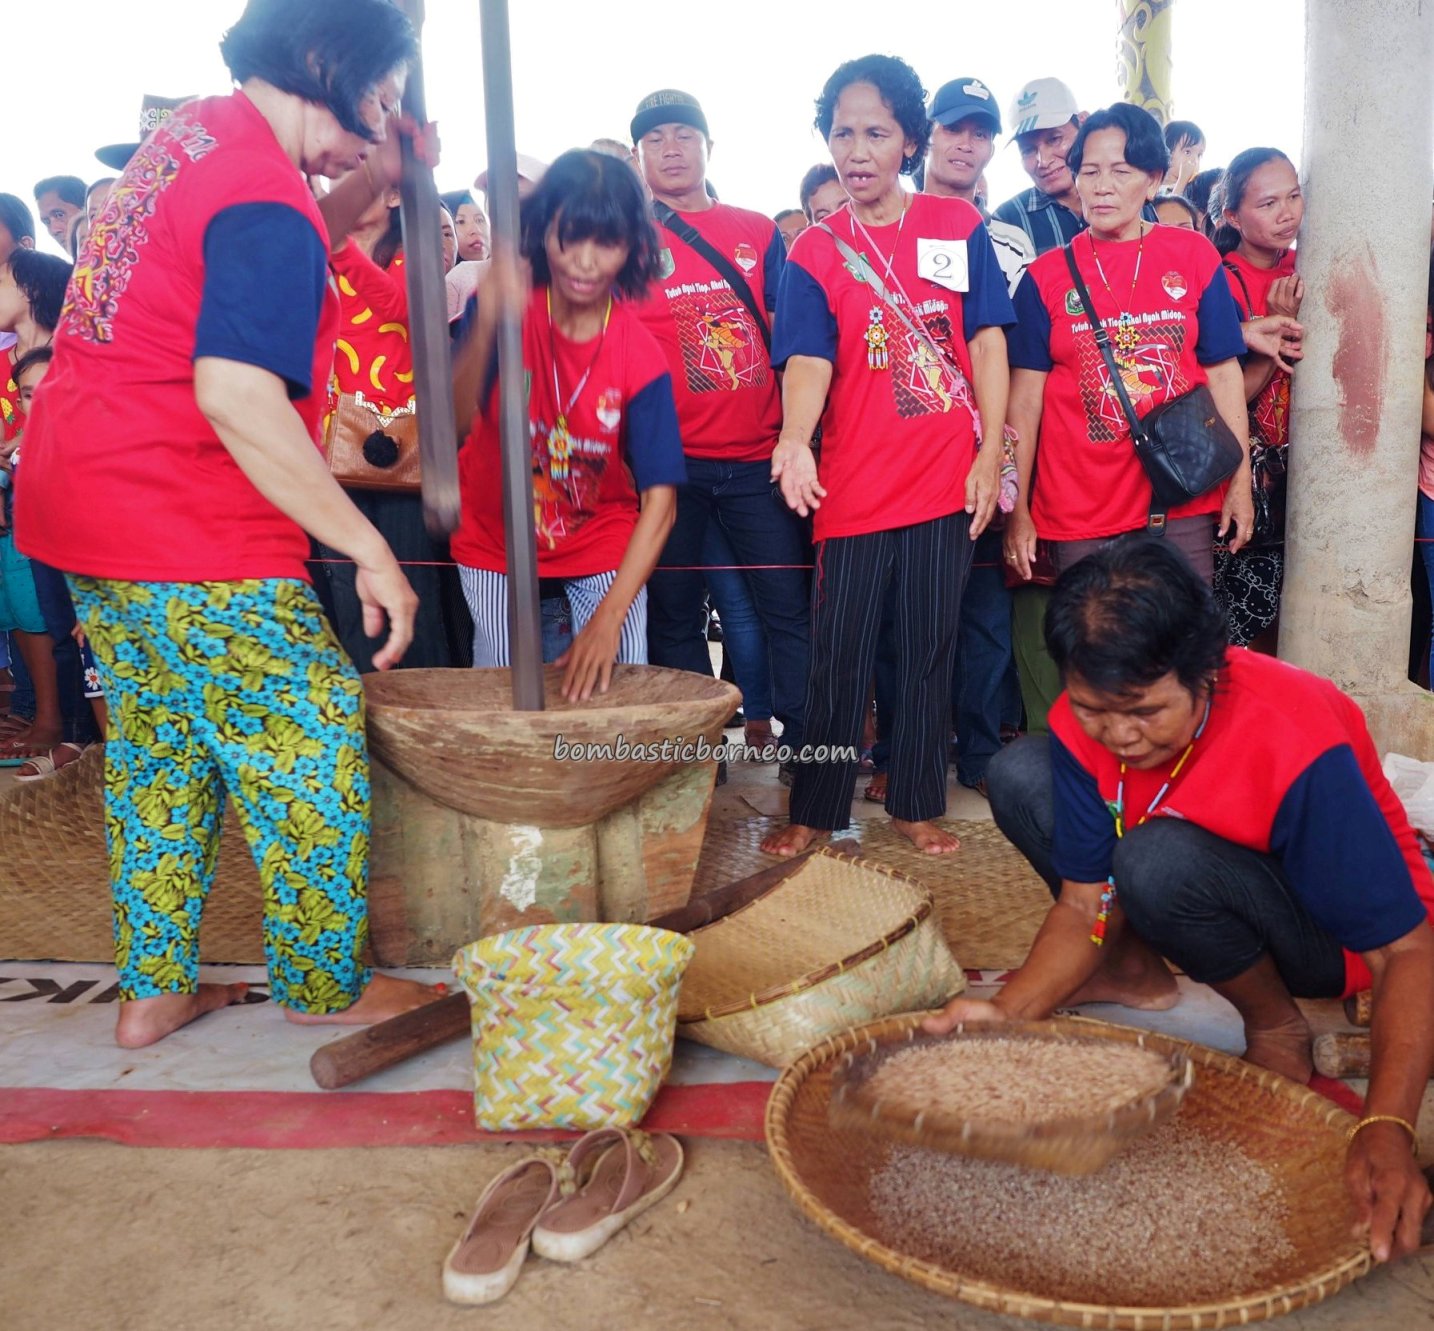 Sanggau, paddy harvest festival, thanksgiving, traditional, backpackers, event, culture, Indonesia, native, tribal, budaya, Tourism, travel guide, 婆罗洲印尼西加里曼丹, 传统土著丰收节日